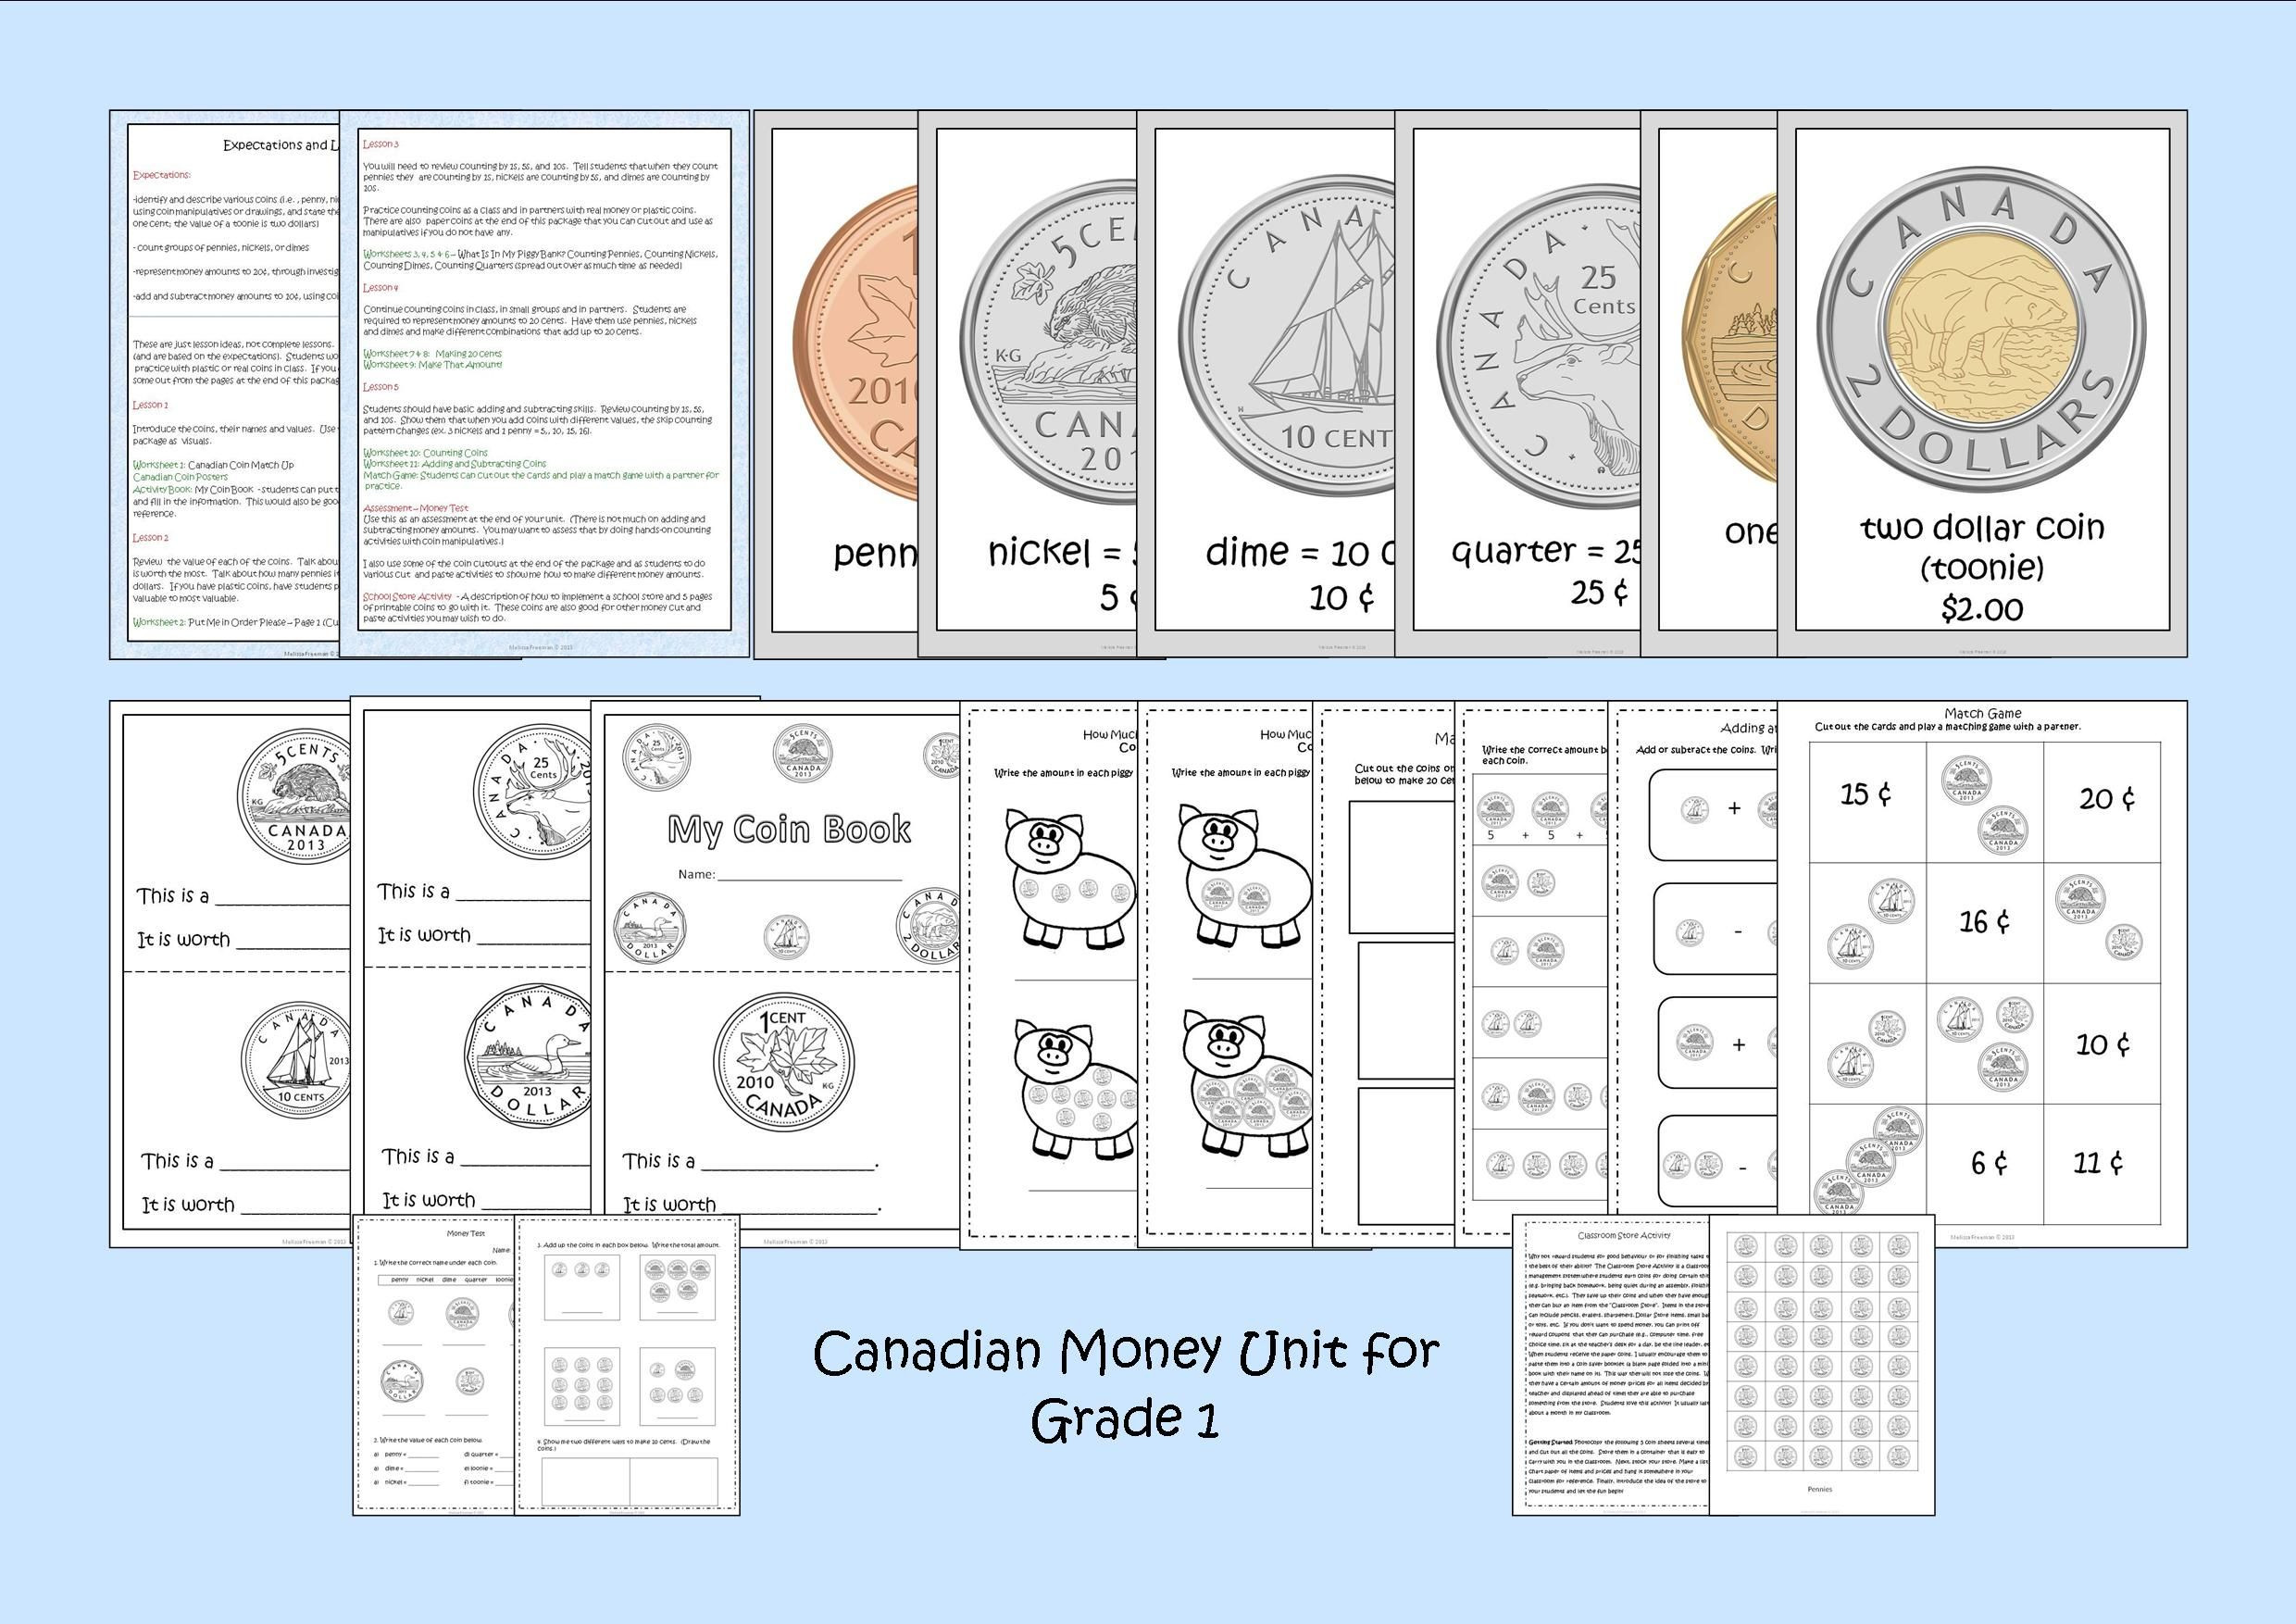 Free Math Worksheets Second Grade 2 Counting Money Counting Money Canadian Nickels Dimes Quarters Loonies